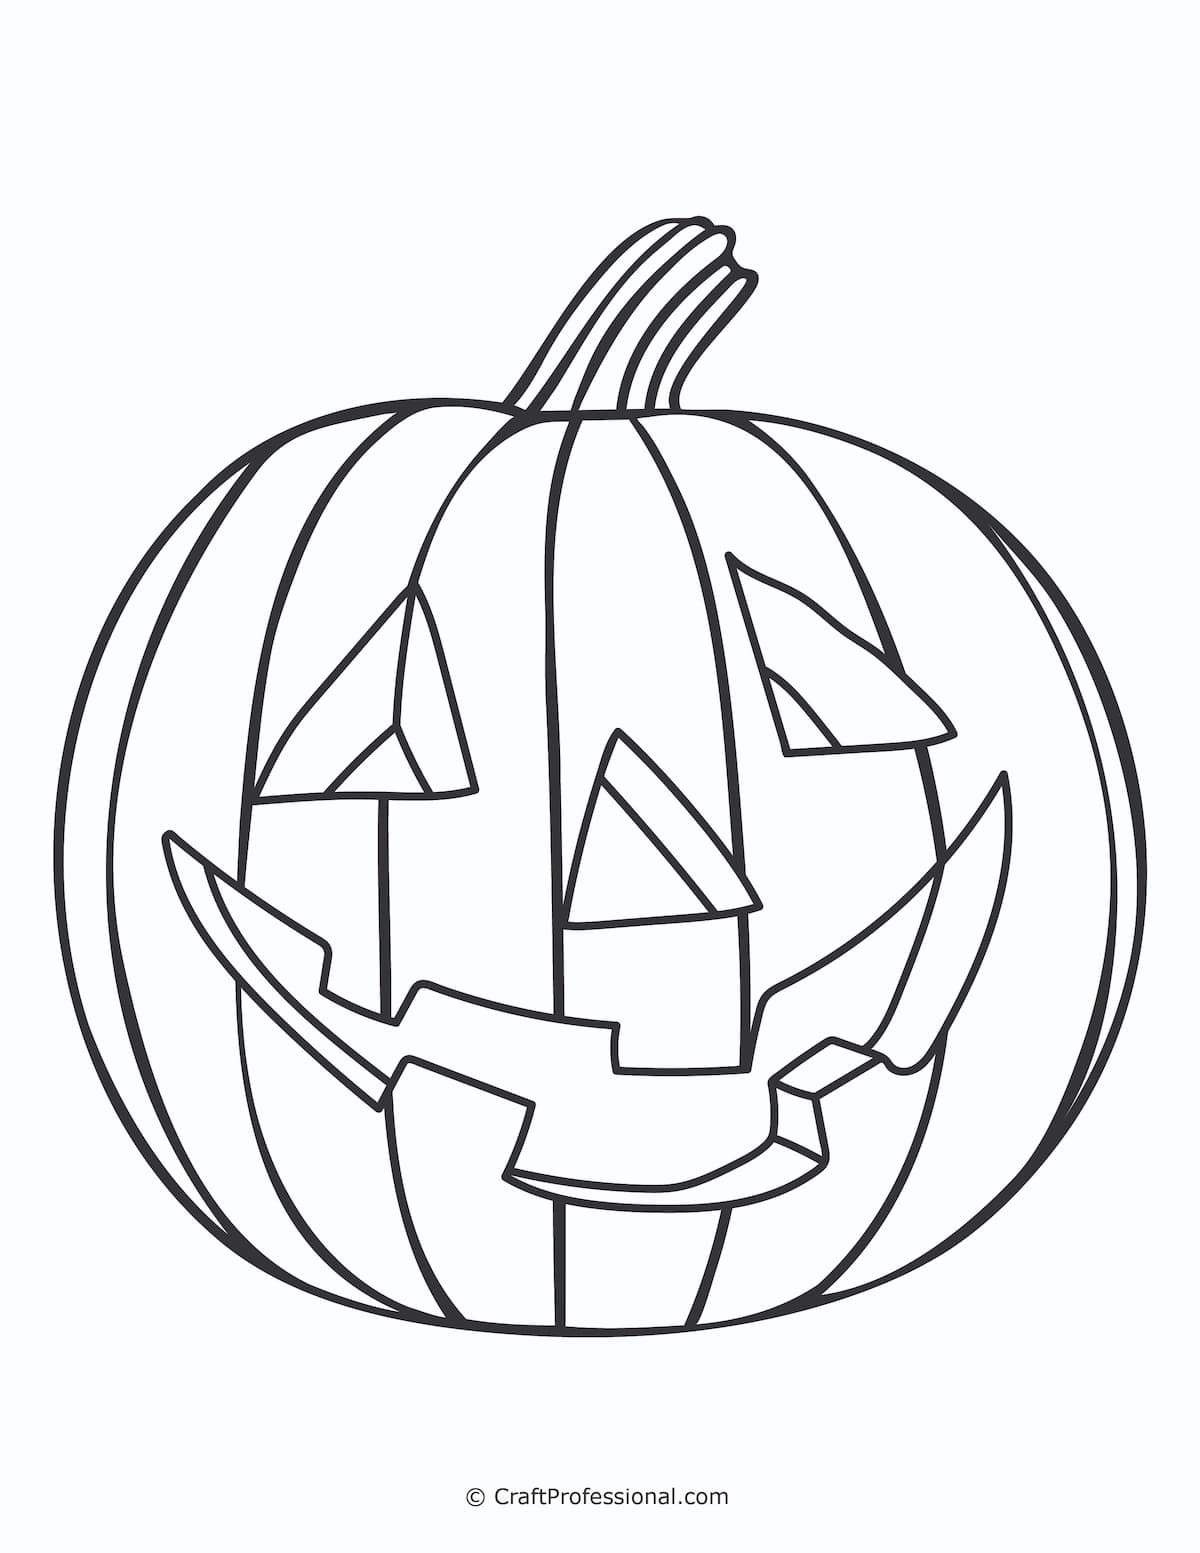 27 Pumpkin Coloring Pages Free Printables for Kids Adults to Color